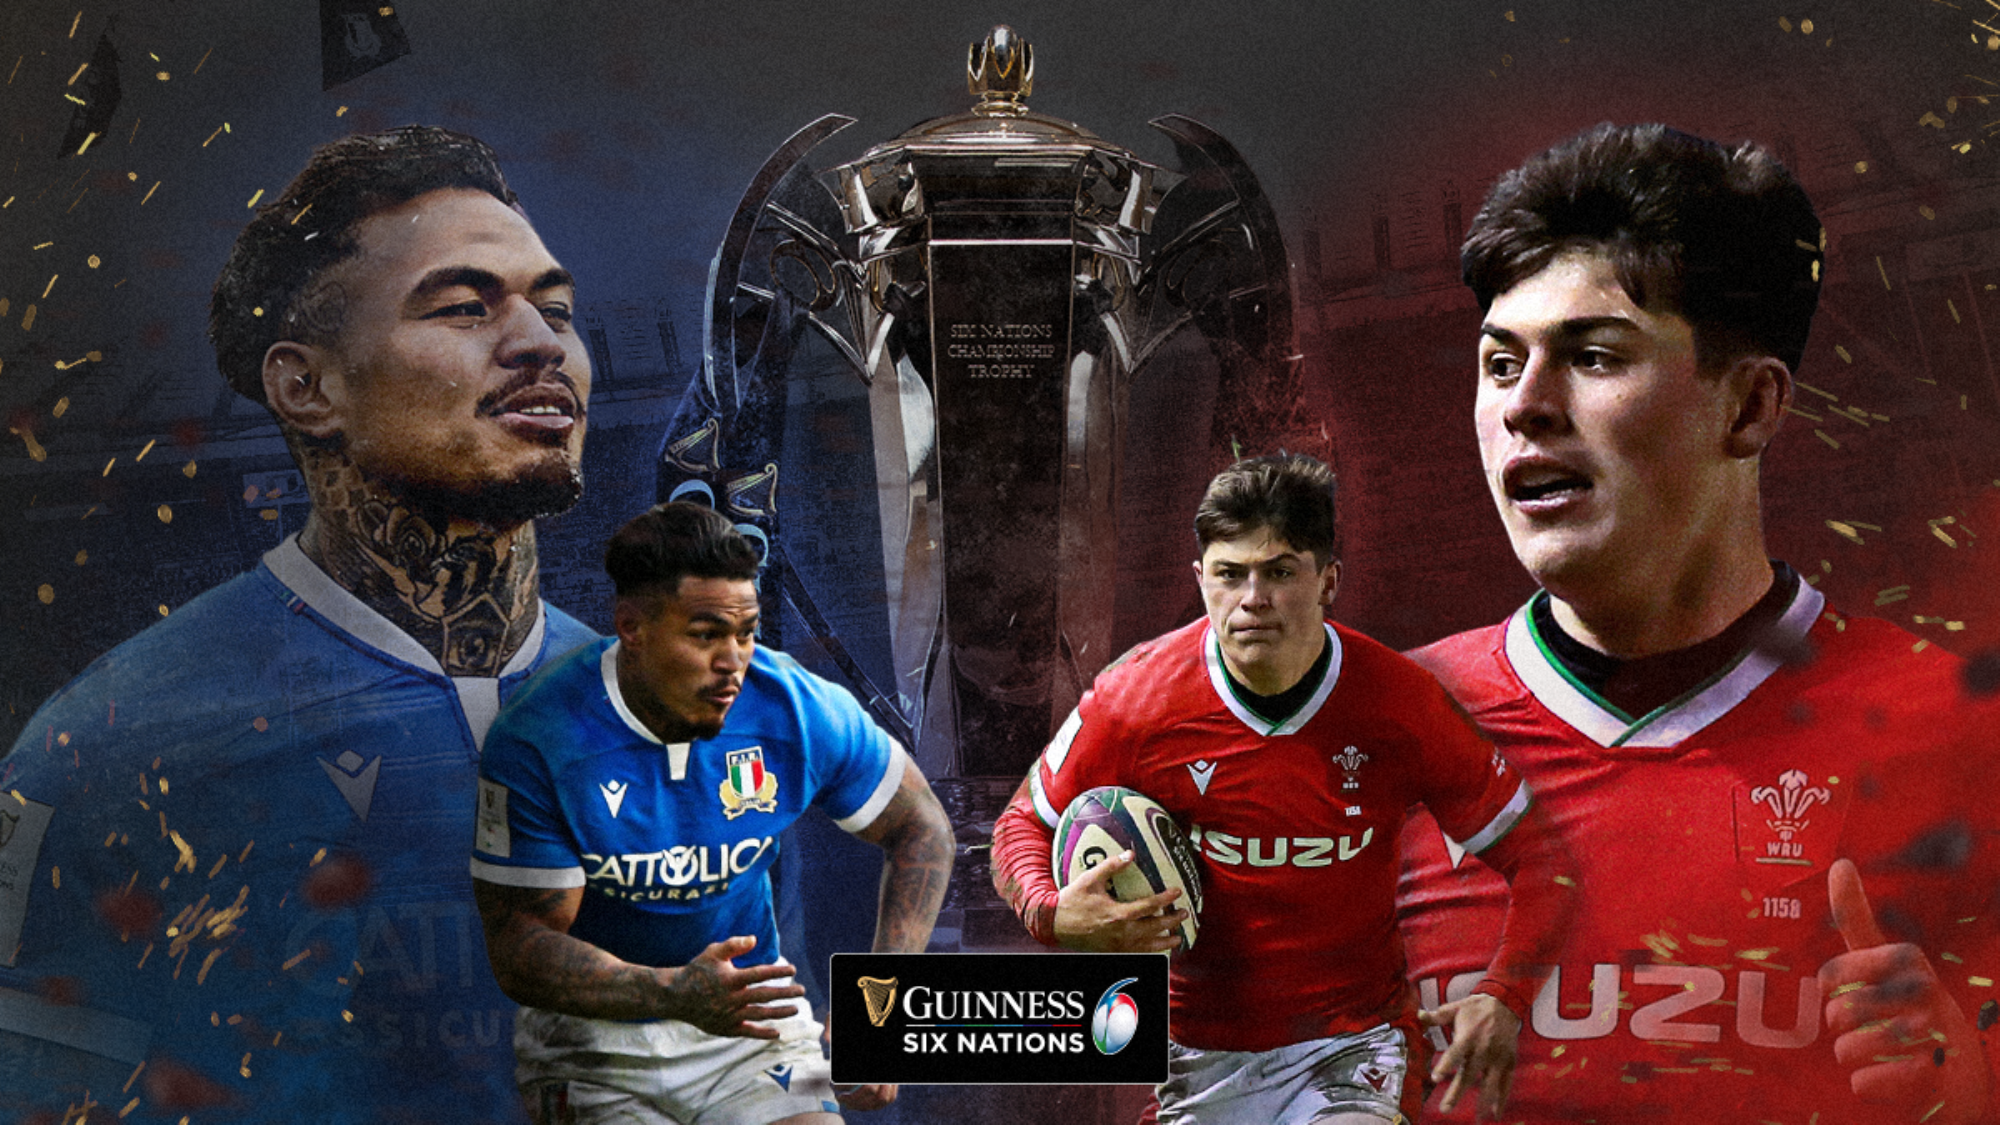 Wales vs Italy Six Nations 2022 Round 5